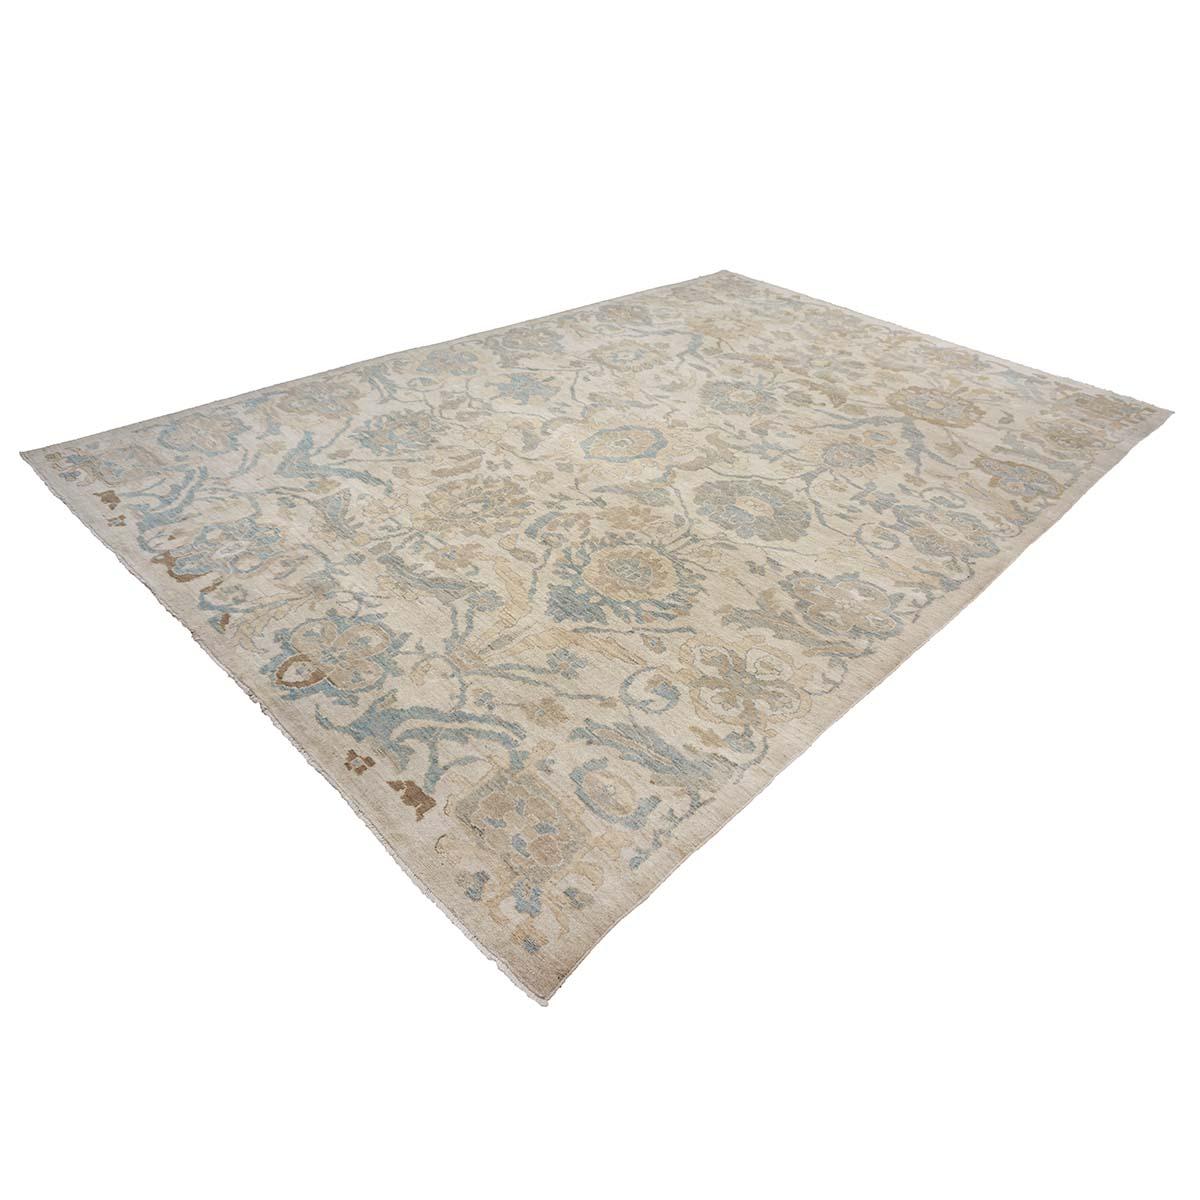 Contemporary 21st Century Persian Sultanabad 10x14 Ivory, Blue & Tan Handmade Area Rug For Sale